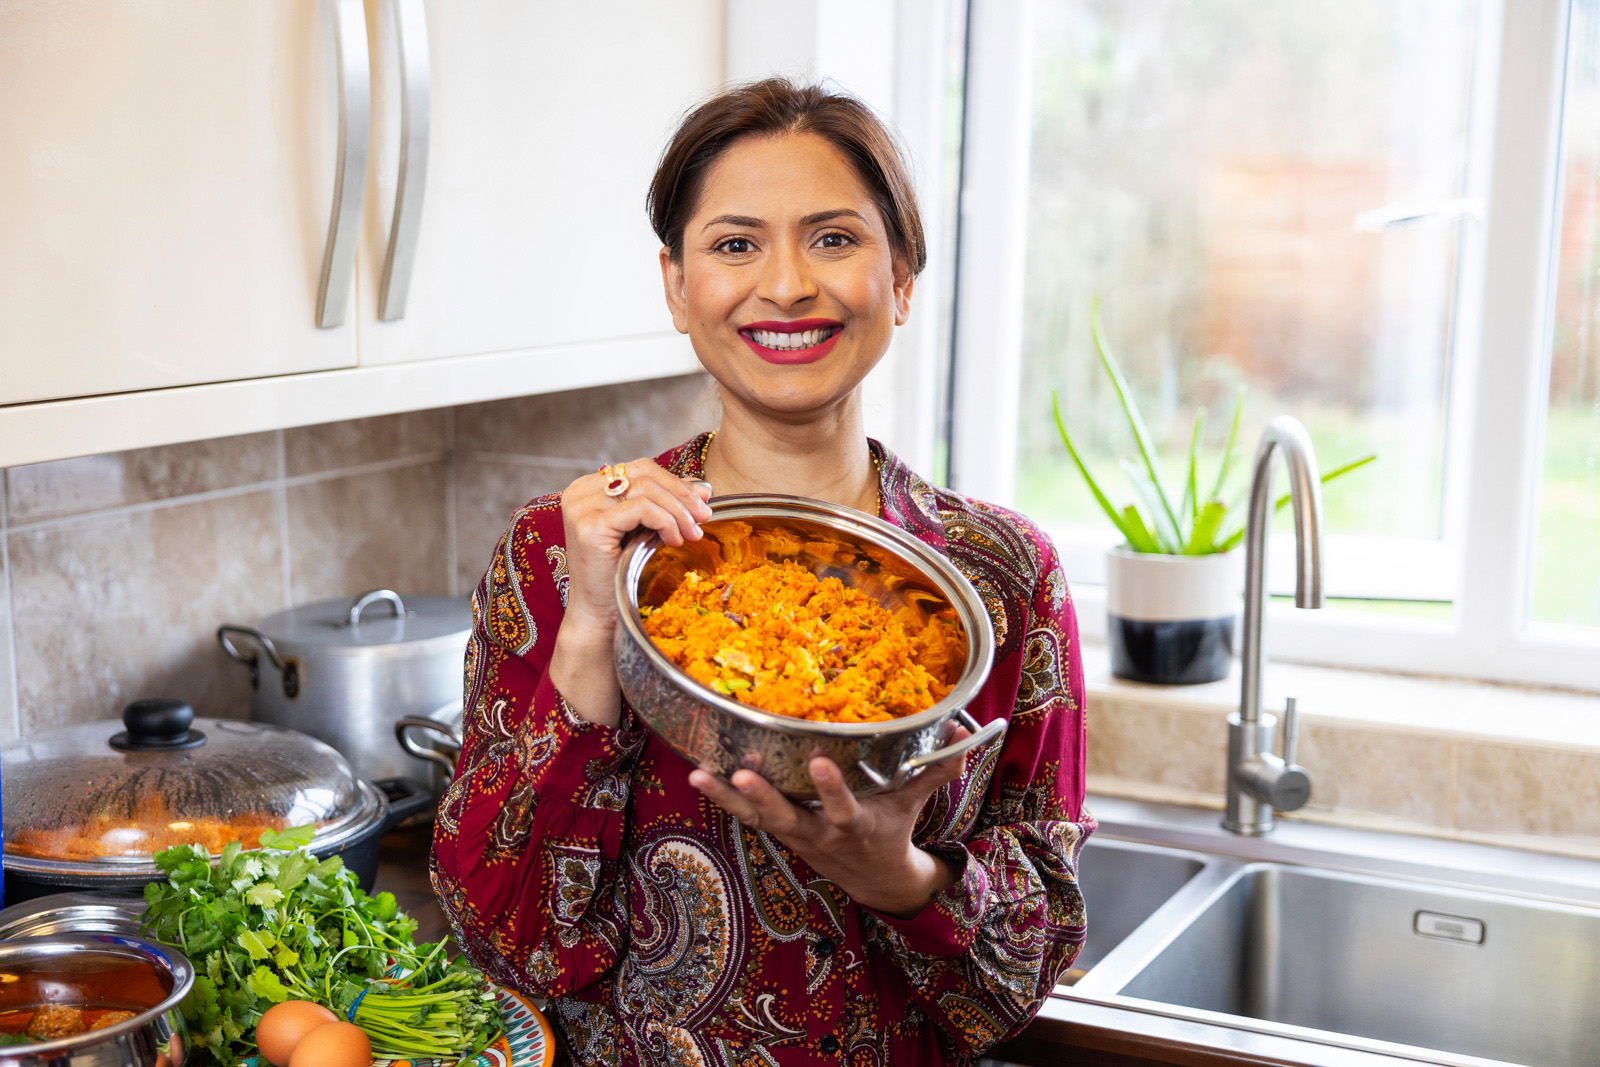 Rameen Kay stands in her kitchen, holding up a pan containing pulao.